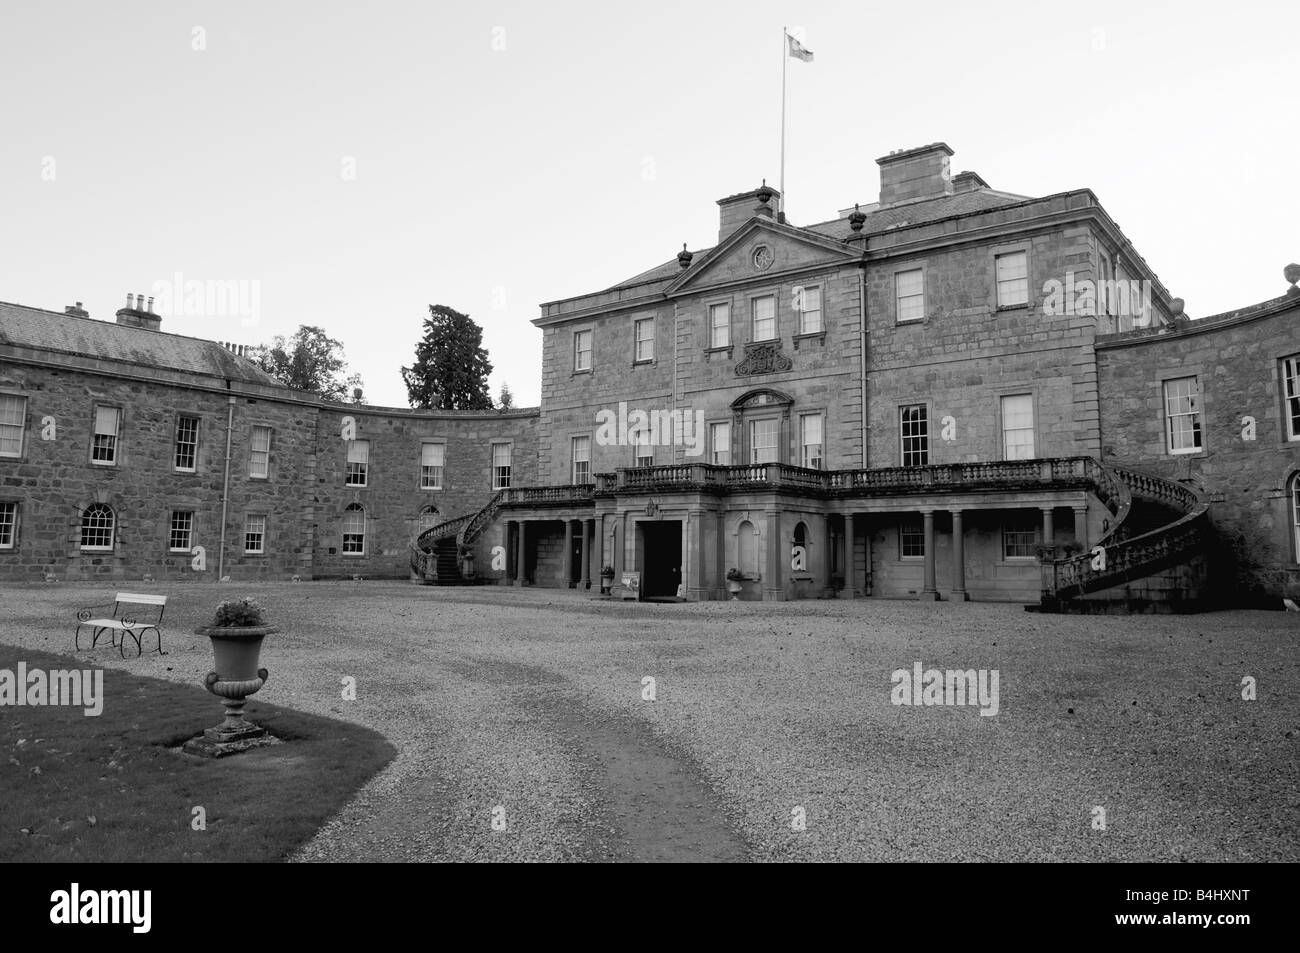 A view of haddo house from the front (main entrance) Stock Photo